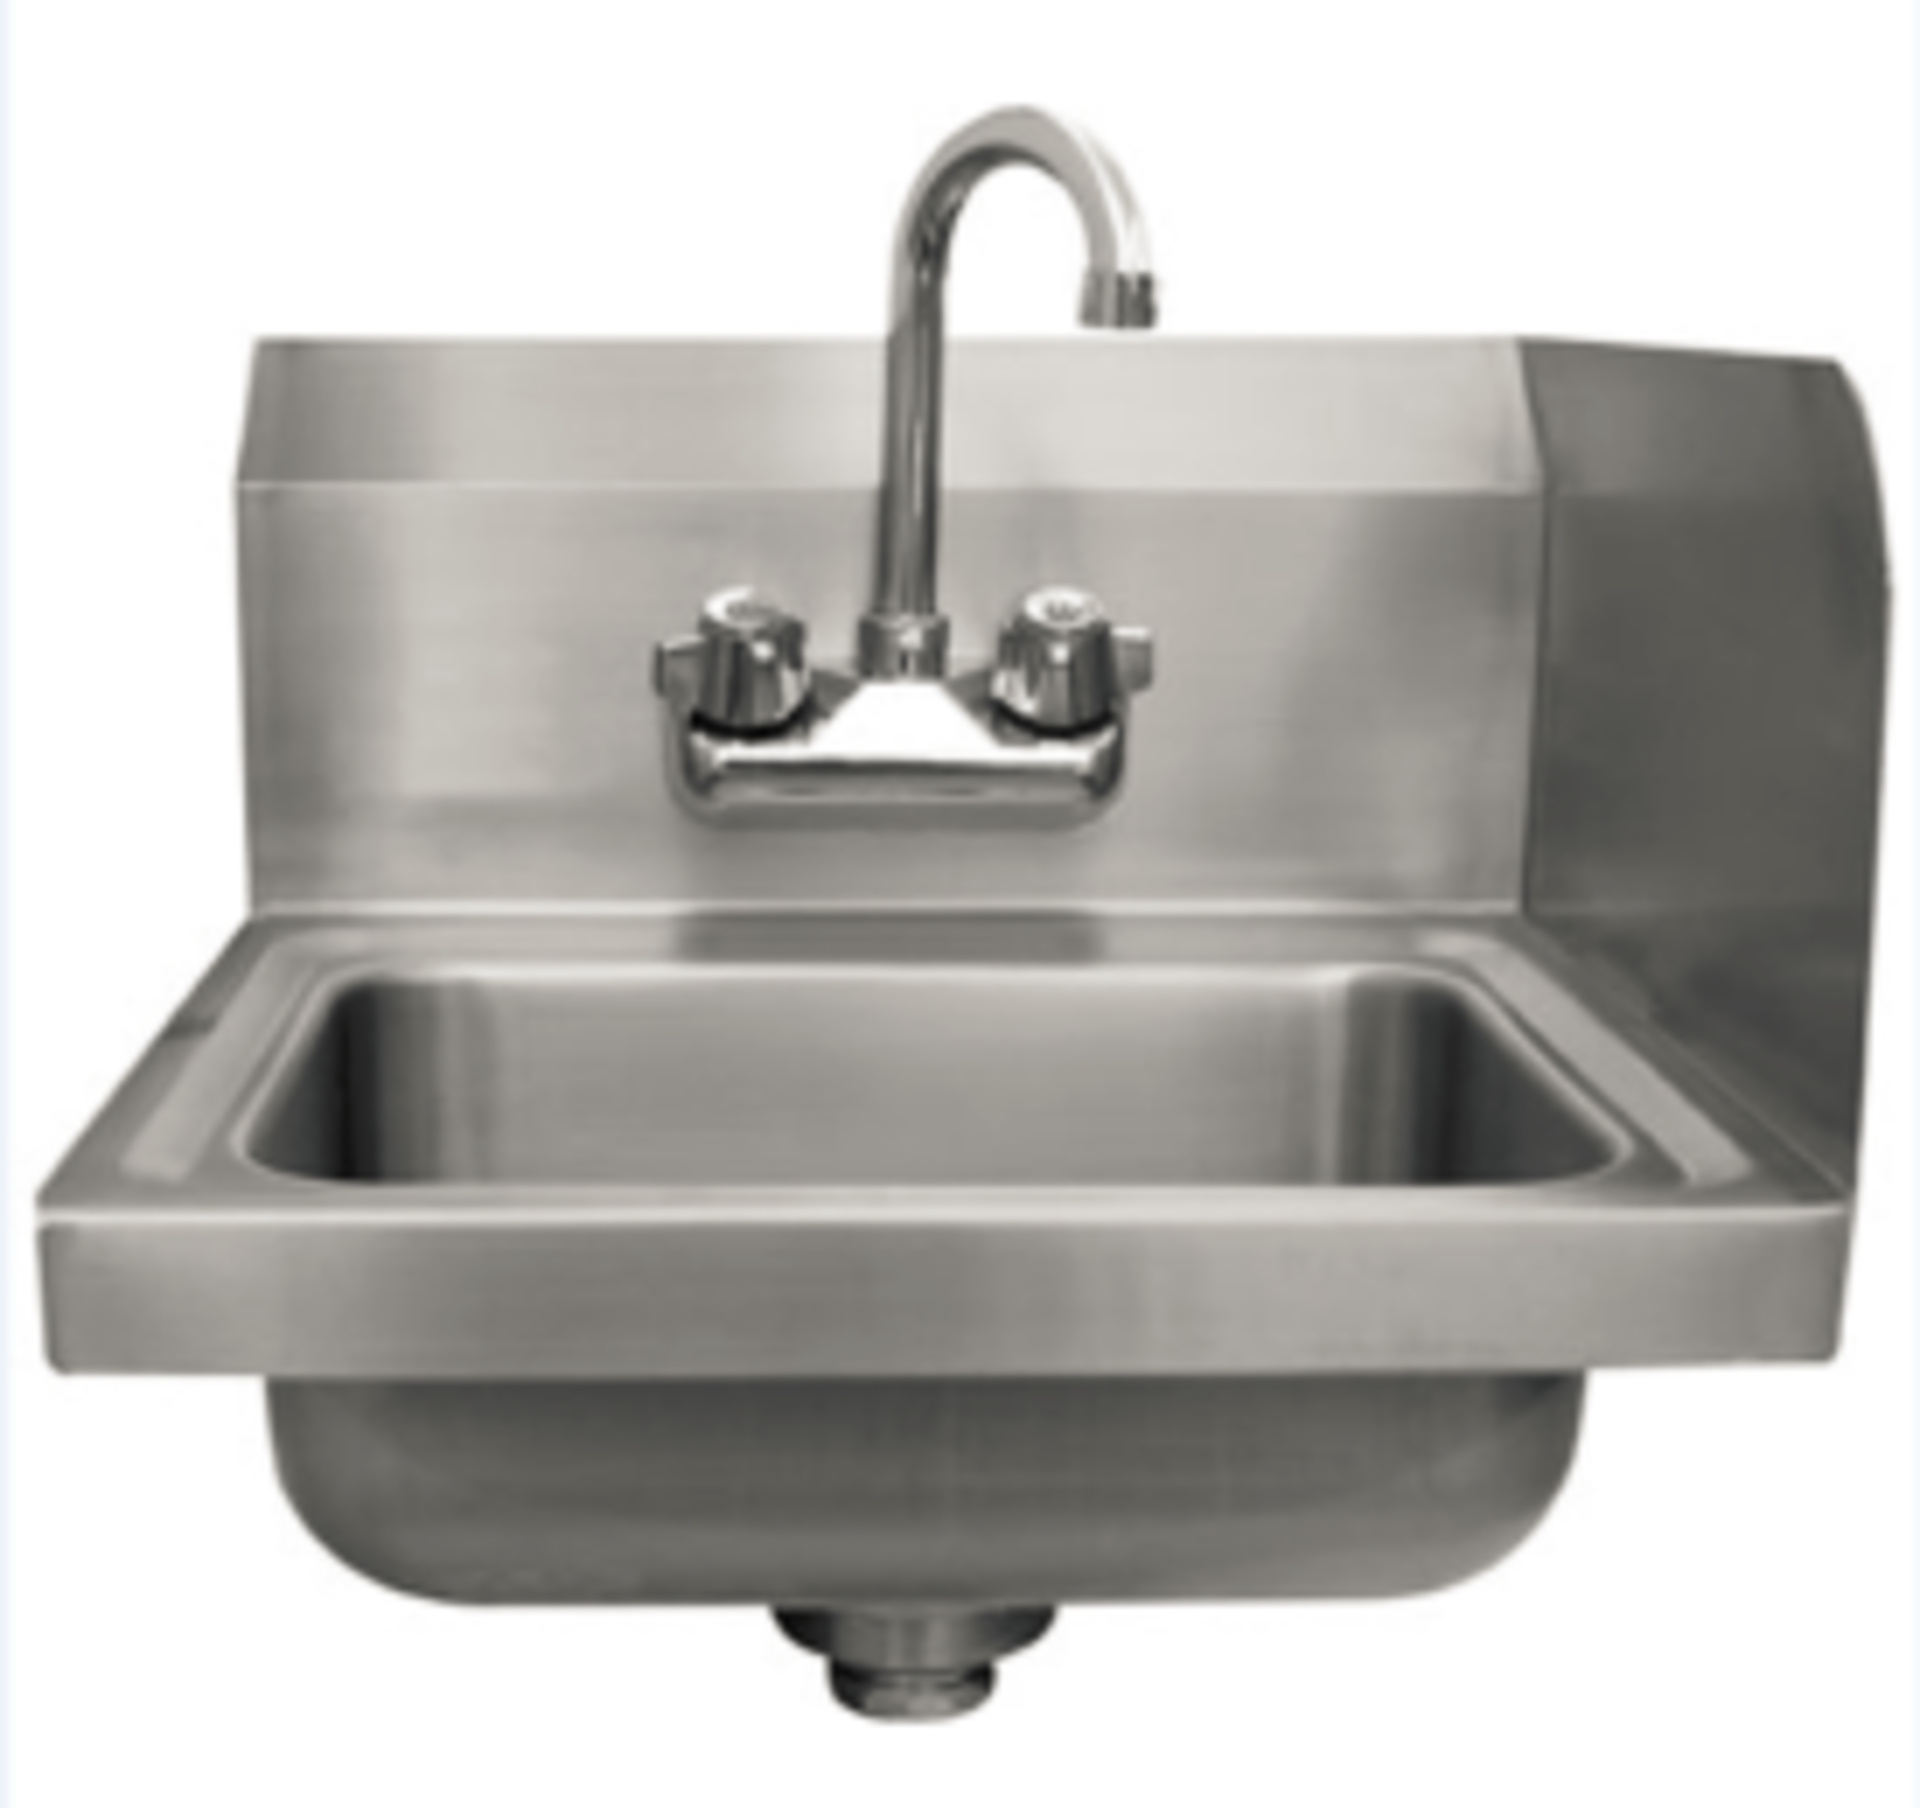 20GA.304S/S hand sink with 12-3/4*10*5 drawing bowl 18GA.304S/S wall mounted clip 18GA.304S/S Left